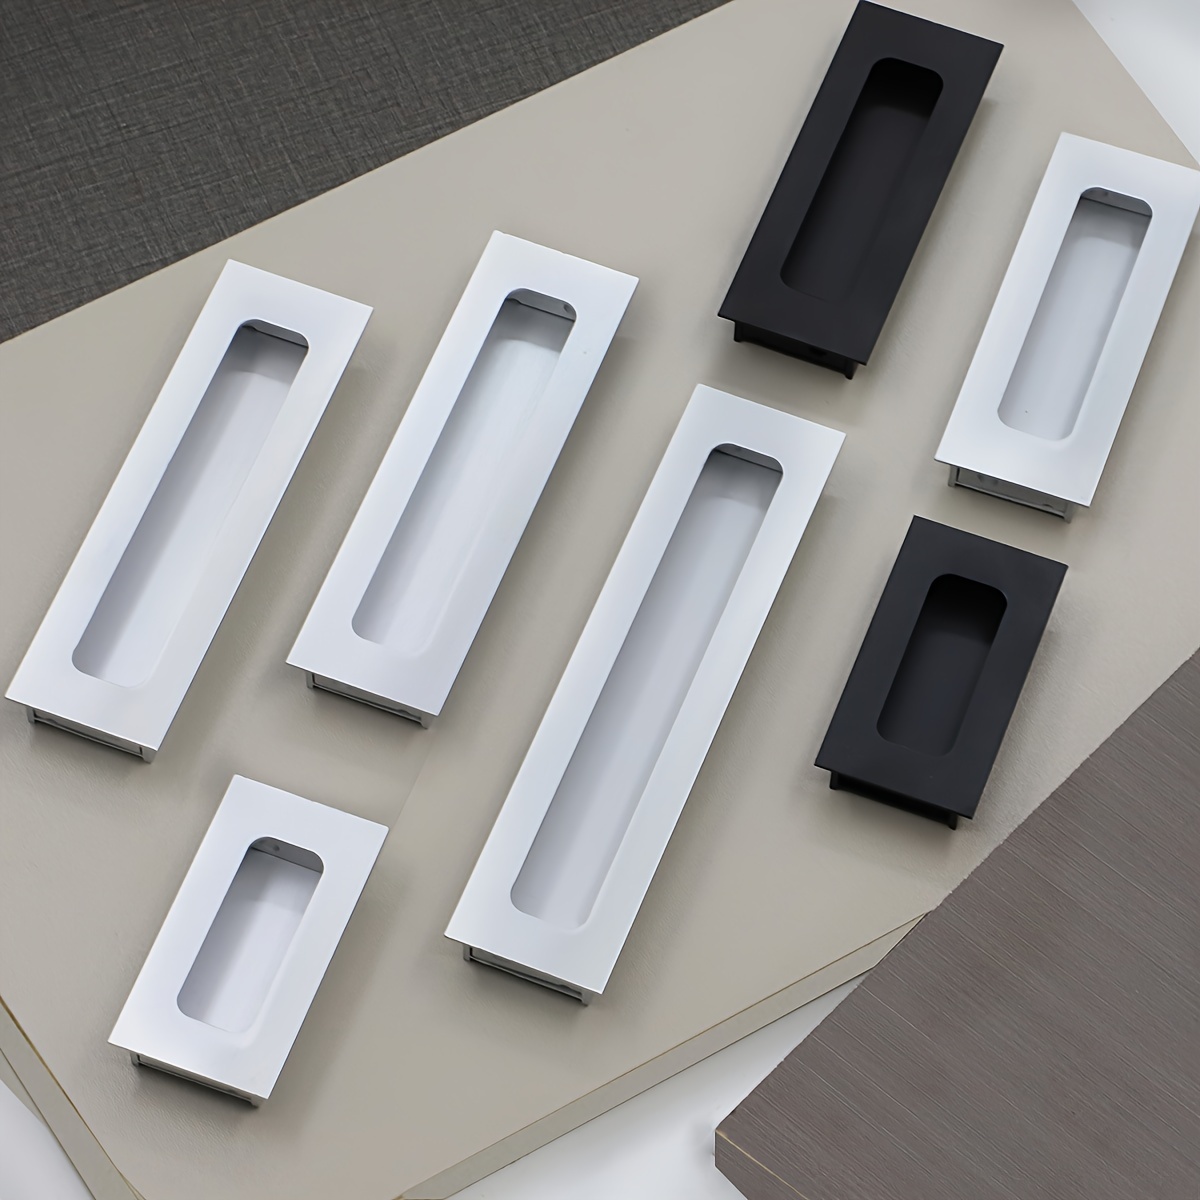 Where To Buy Furniture Handles? - Rochehandle